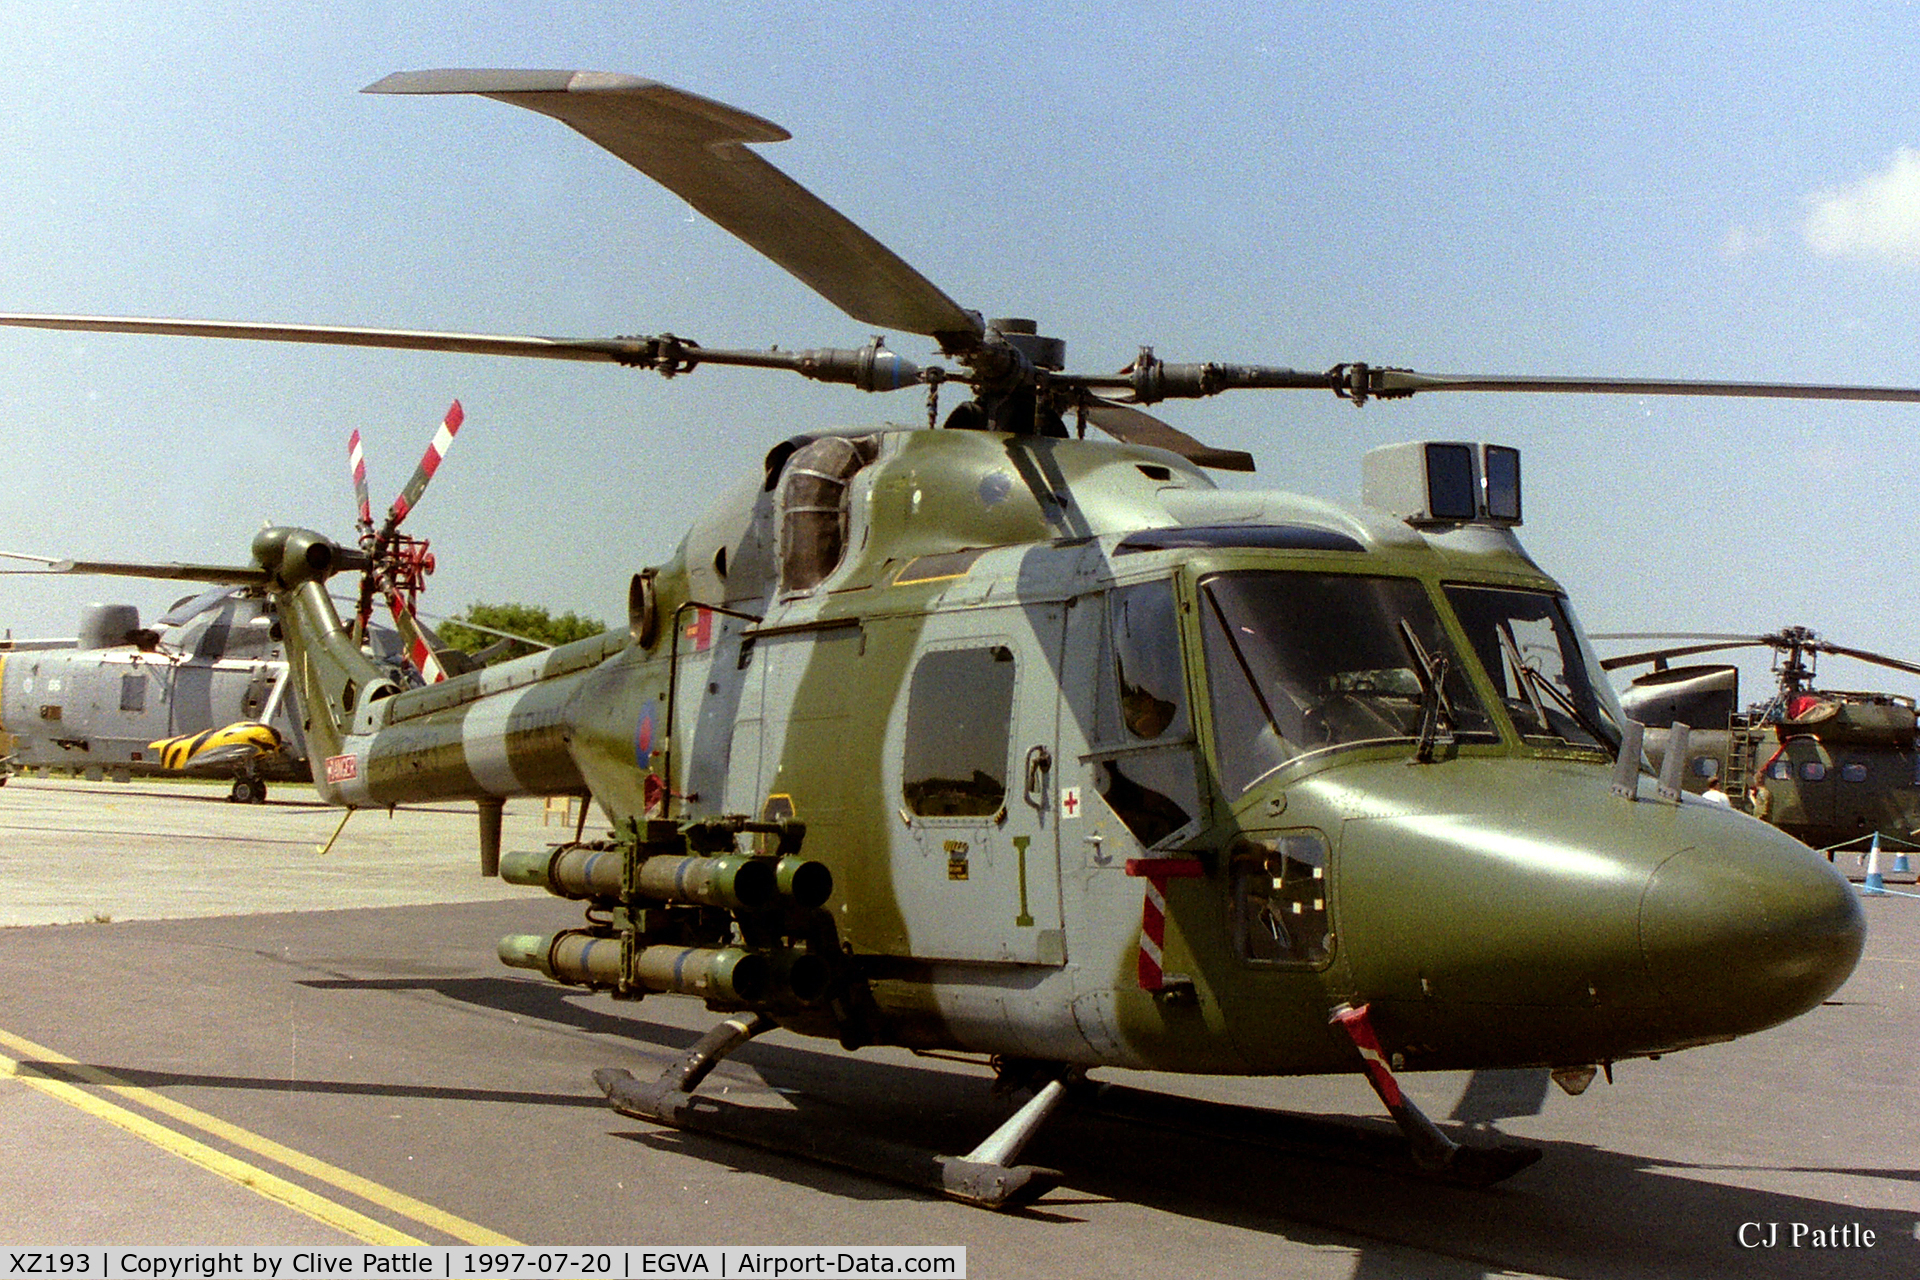 XZ193, 1978 Westland Lynx AH.7 C/N 093, On display at RIAT '97 at RAF Fairford EGVA whilst coded 'I' with 671 Sqn Army Air Corps